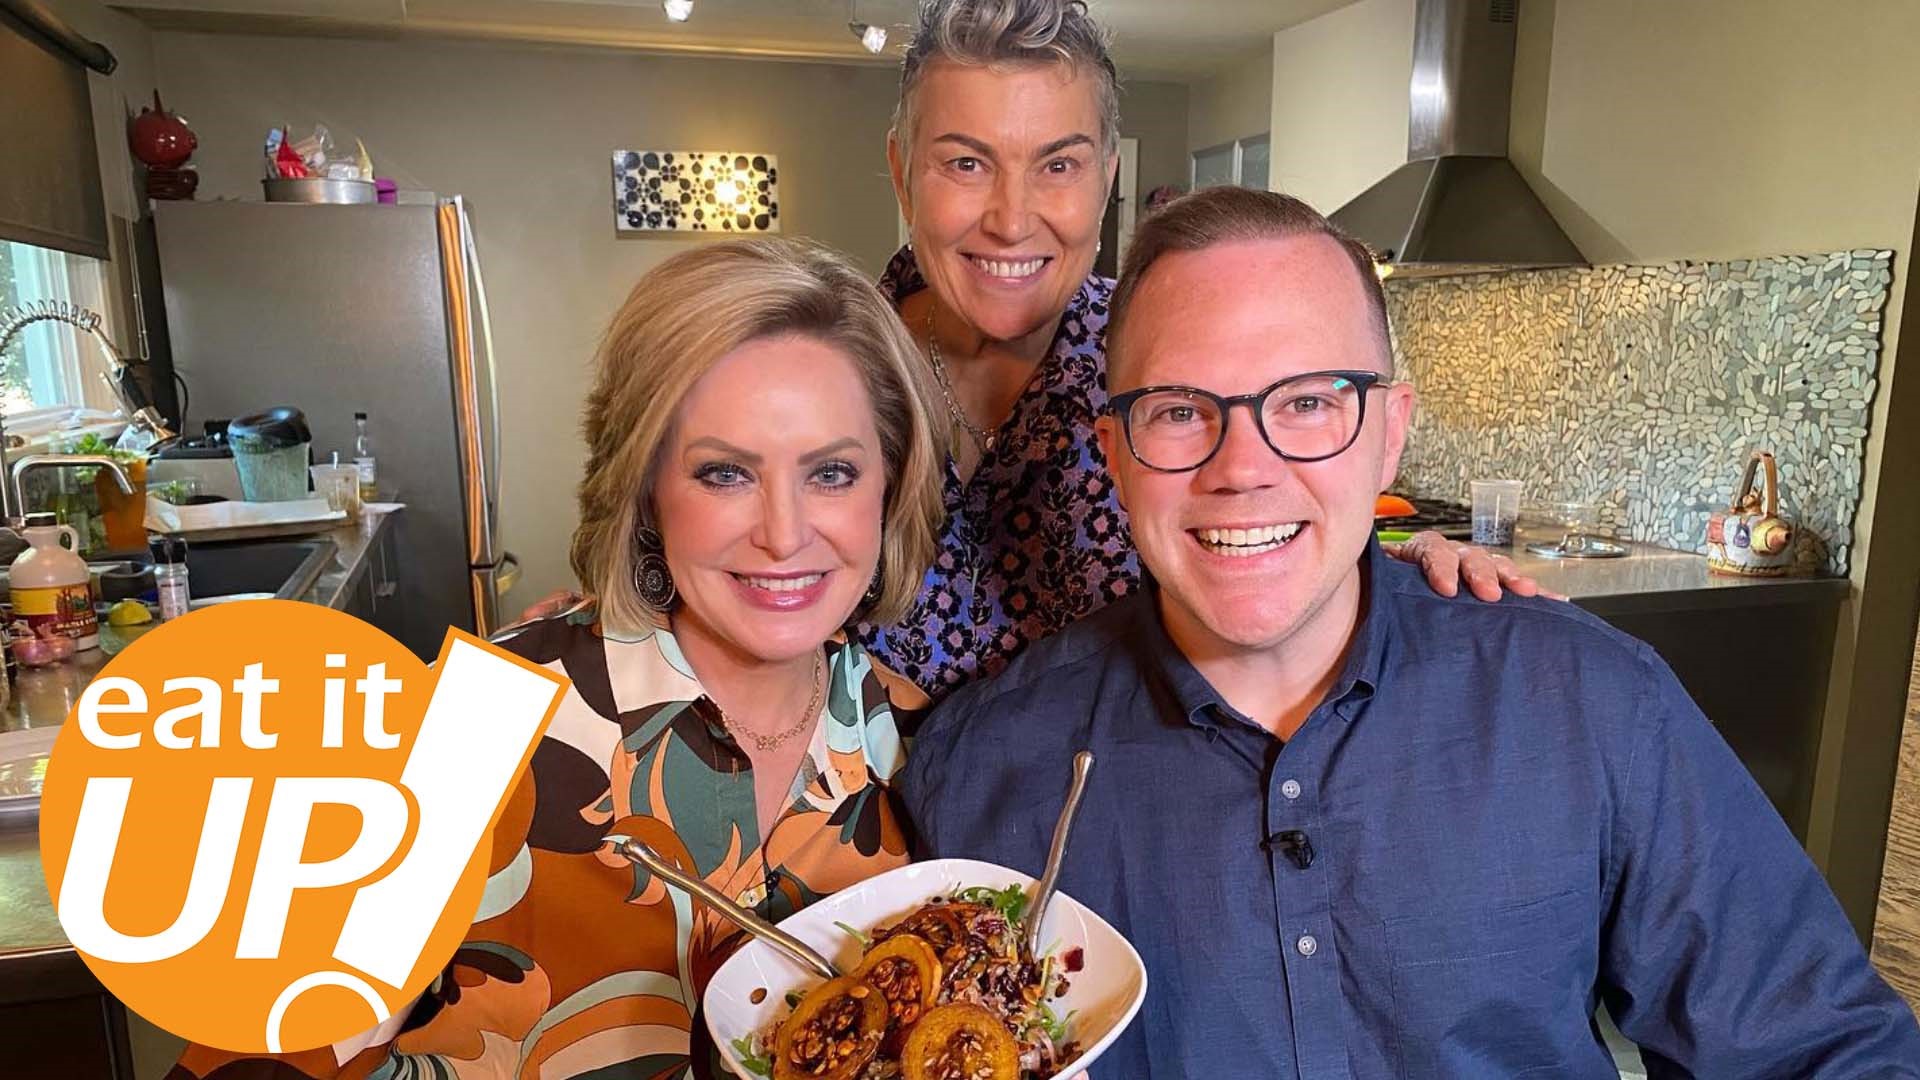 This week, Skot and Karen take us to Vito and Vera, a local restaurant known for its plant based versions of dishes such as lasagna, tacos, and other options.